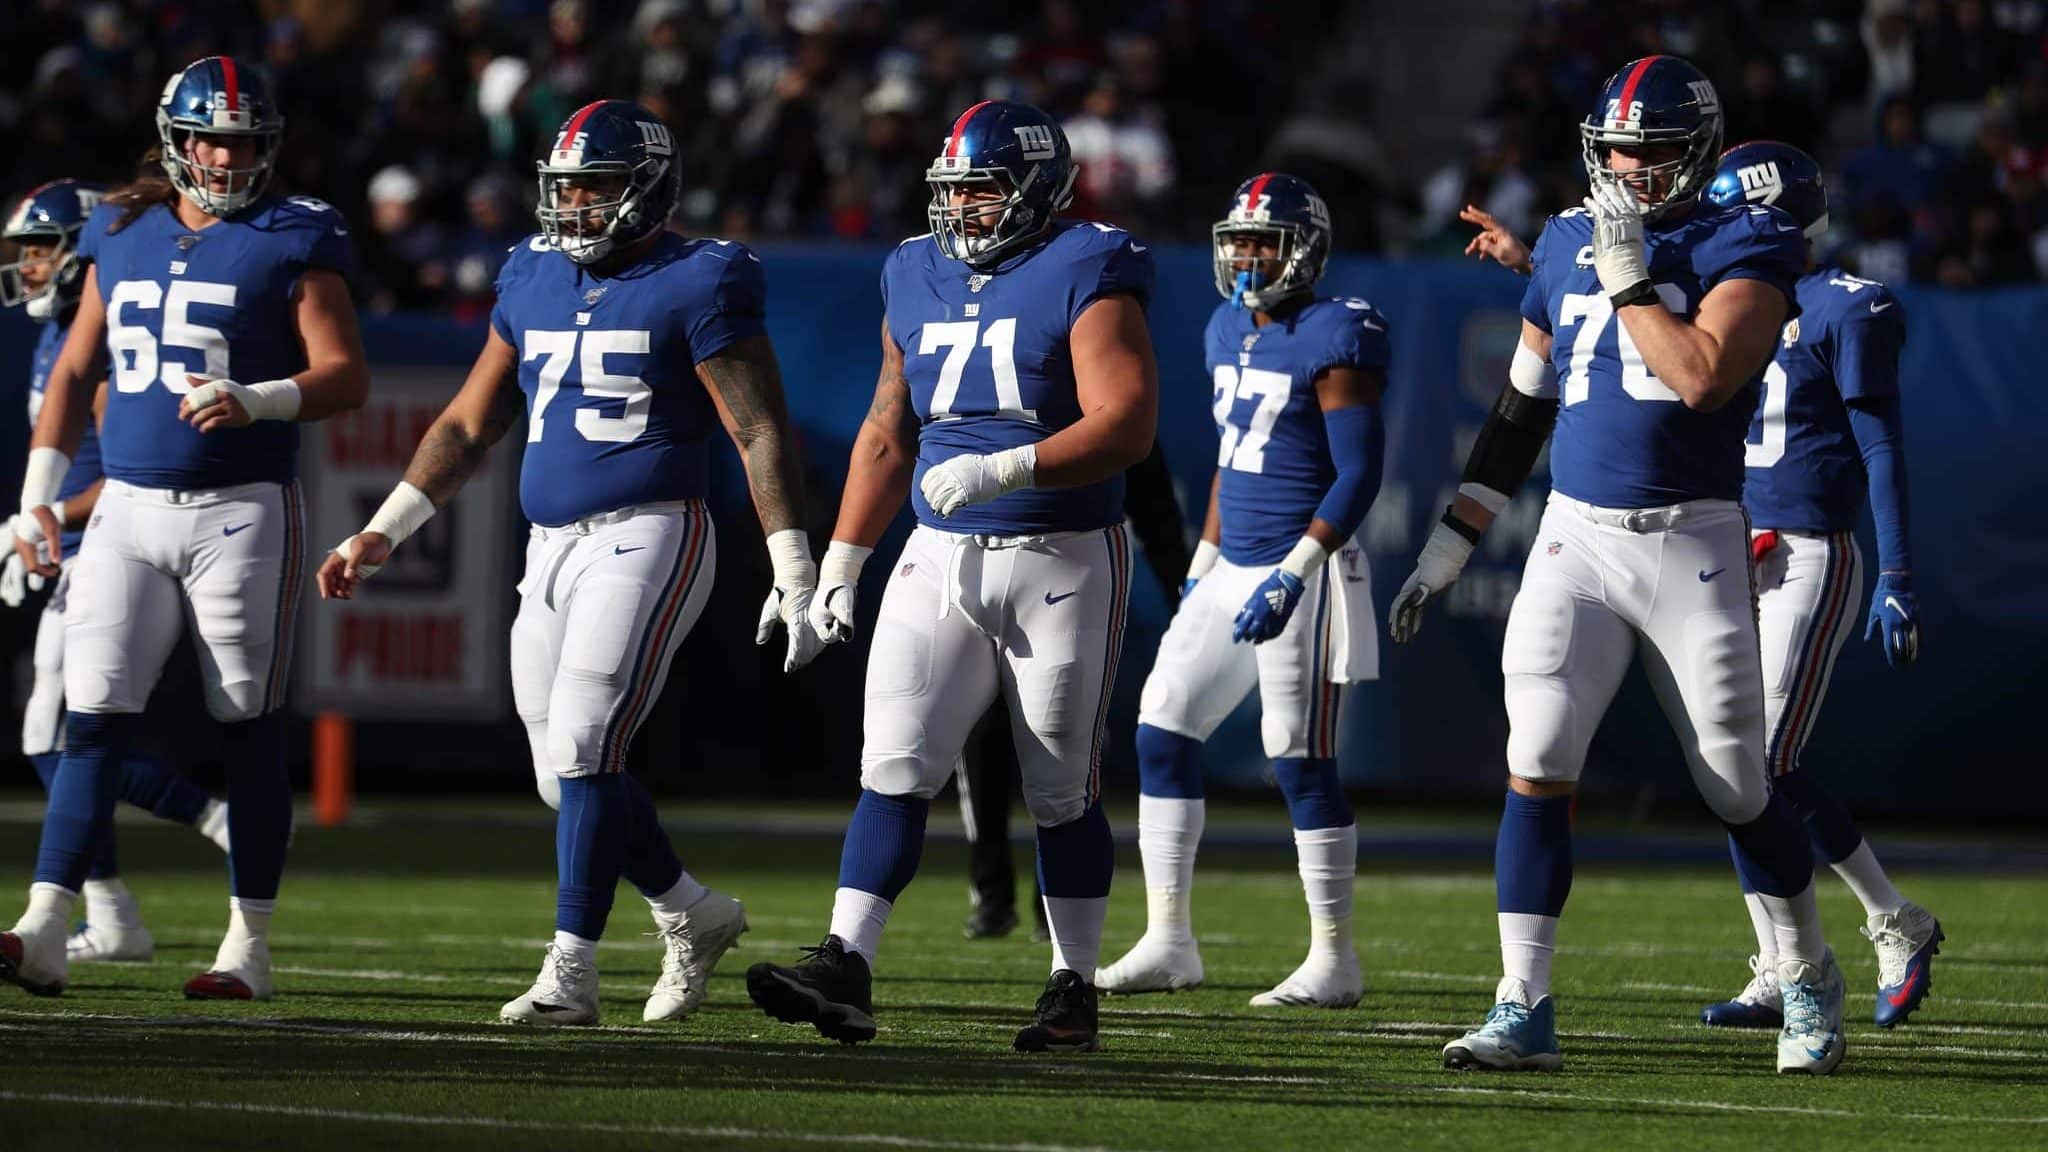 EAST RUTHERFORD, NEW JERSEY - DECEMBER 15: Nick Gates #65, Jon Halapio #75, Will Hernandez #71, and Nate Solder #76 of the New York Giants line up against the Miami Dolphins during their game at MetLife Stadium on December 15, 2019 in East Rutherford, New Jersey.